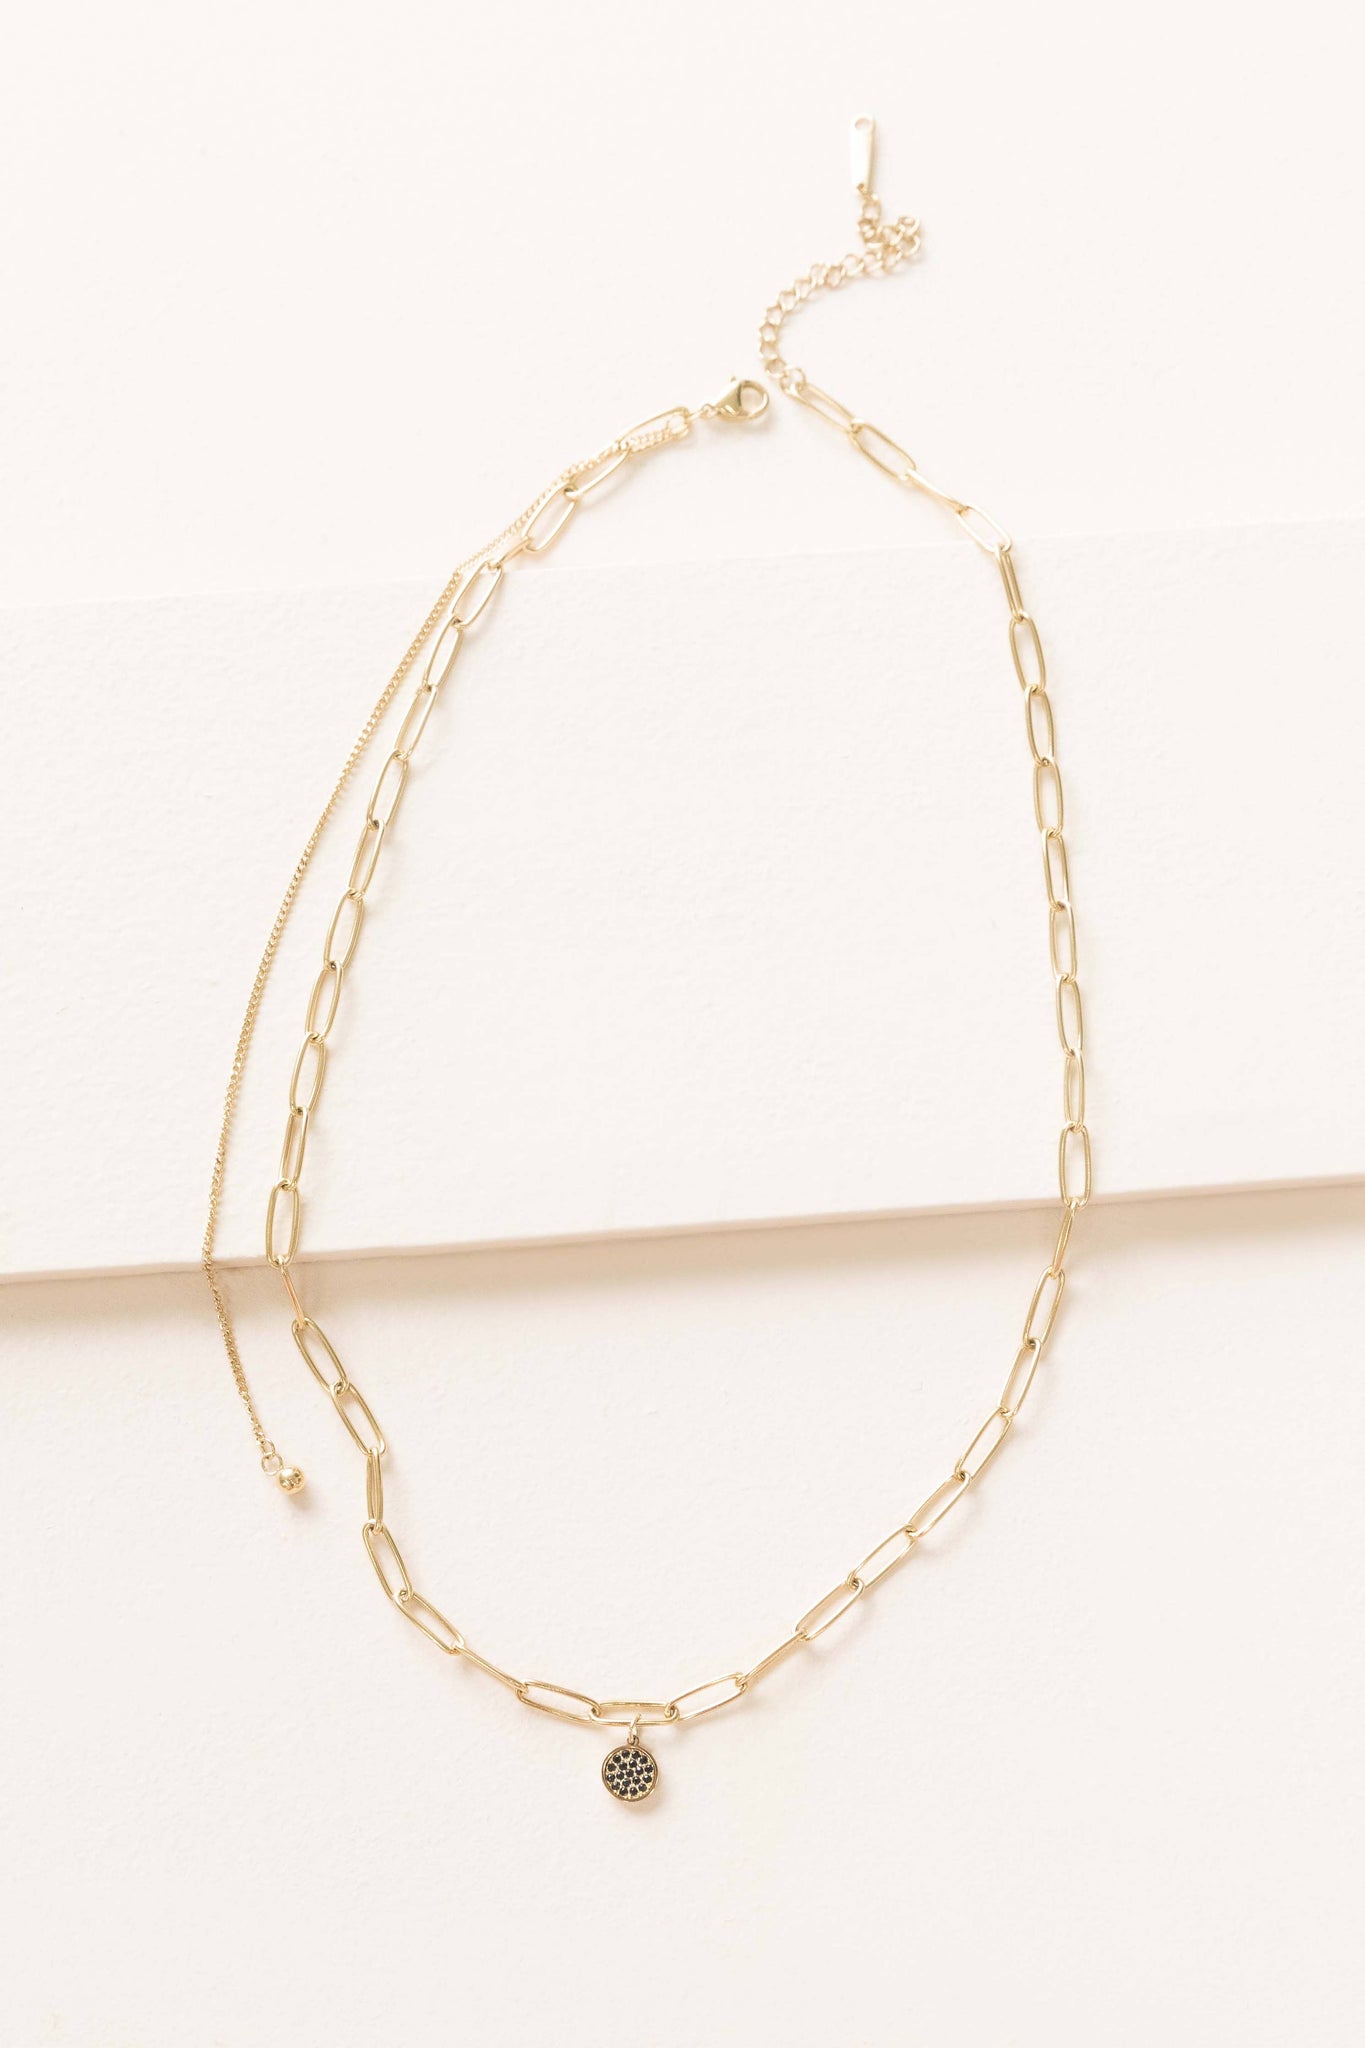 Cassio Charm Gold Necklace